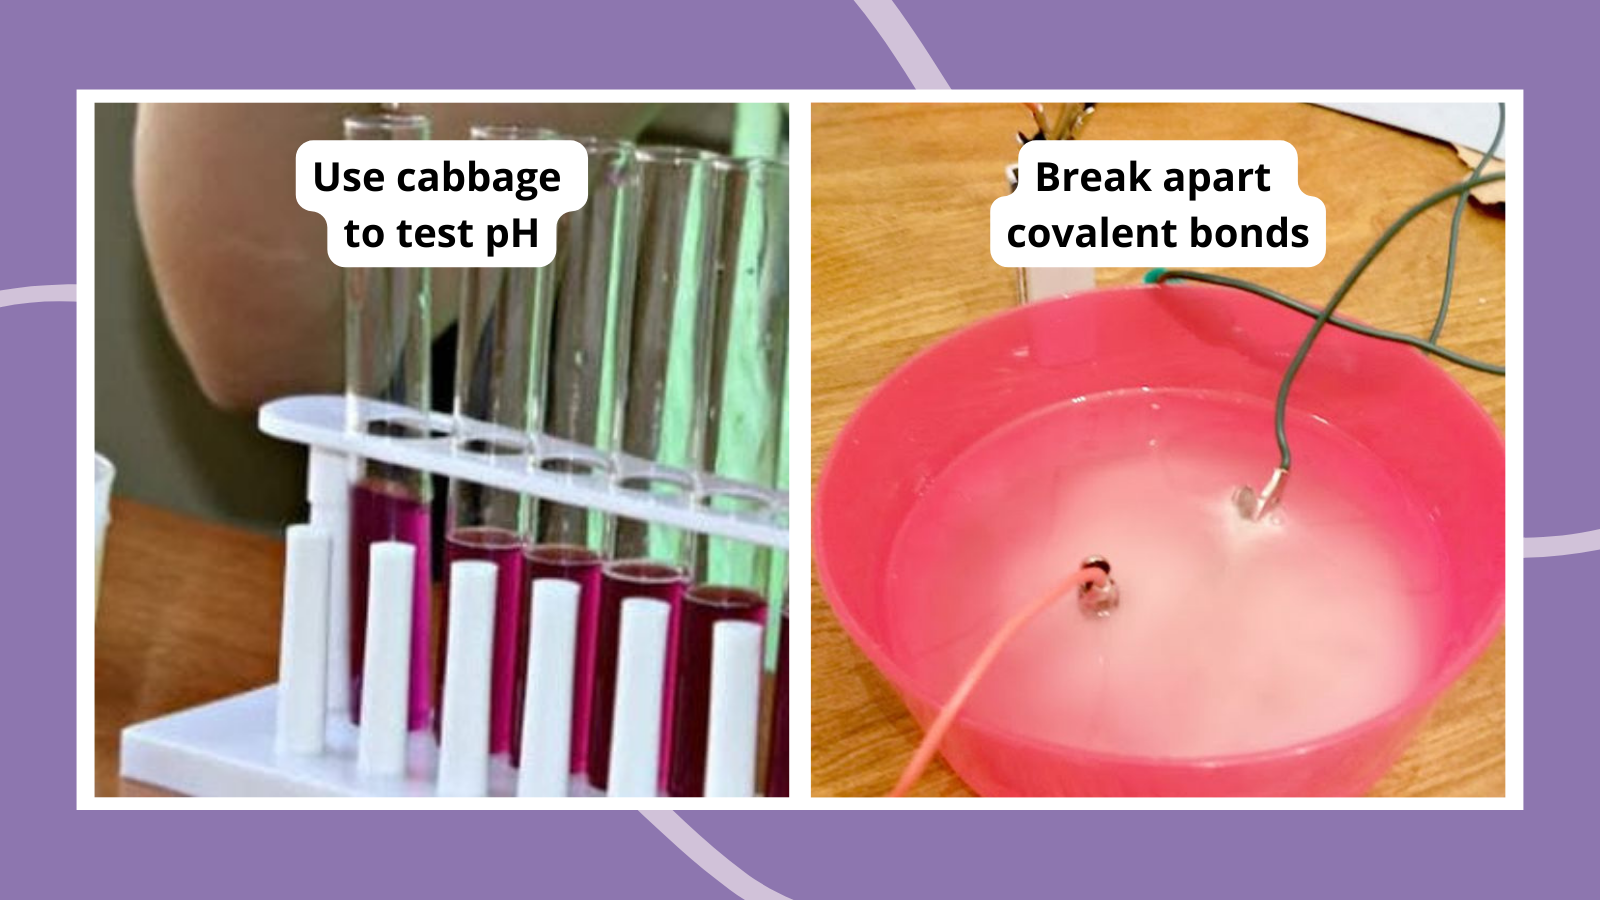 Chemistry experiments including using cabbage to test pH and breaking apart covalent bonds